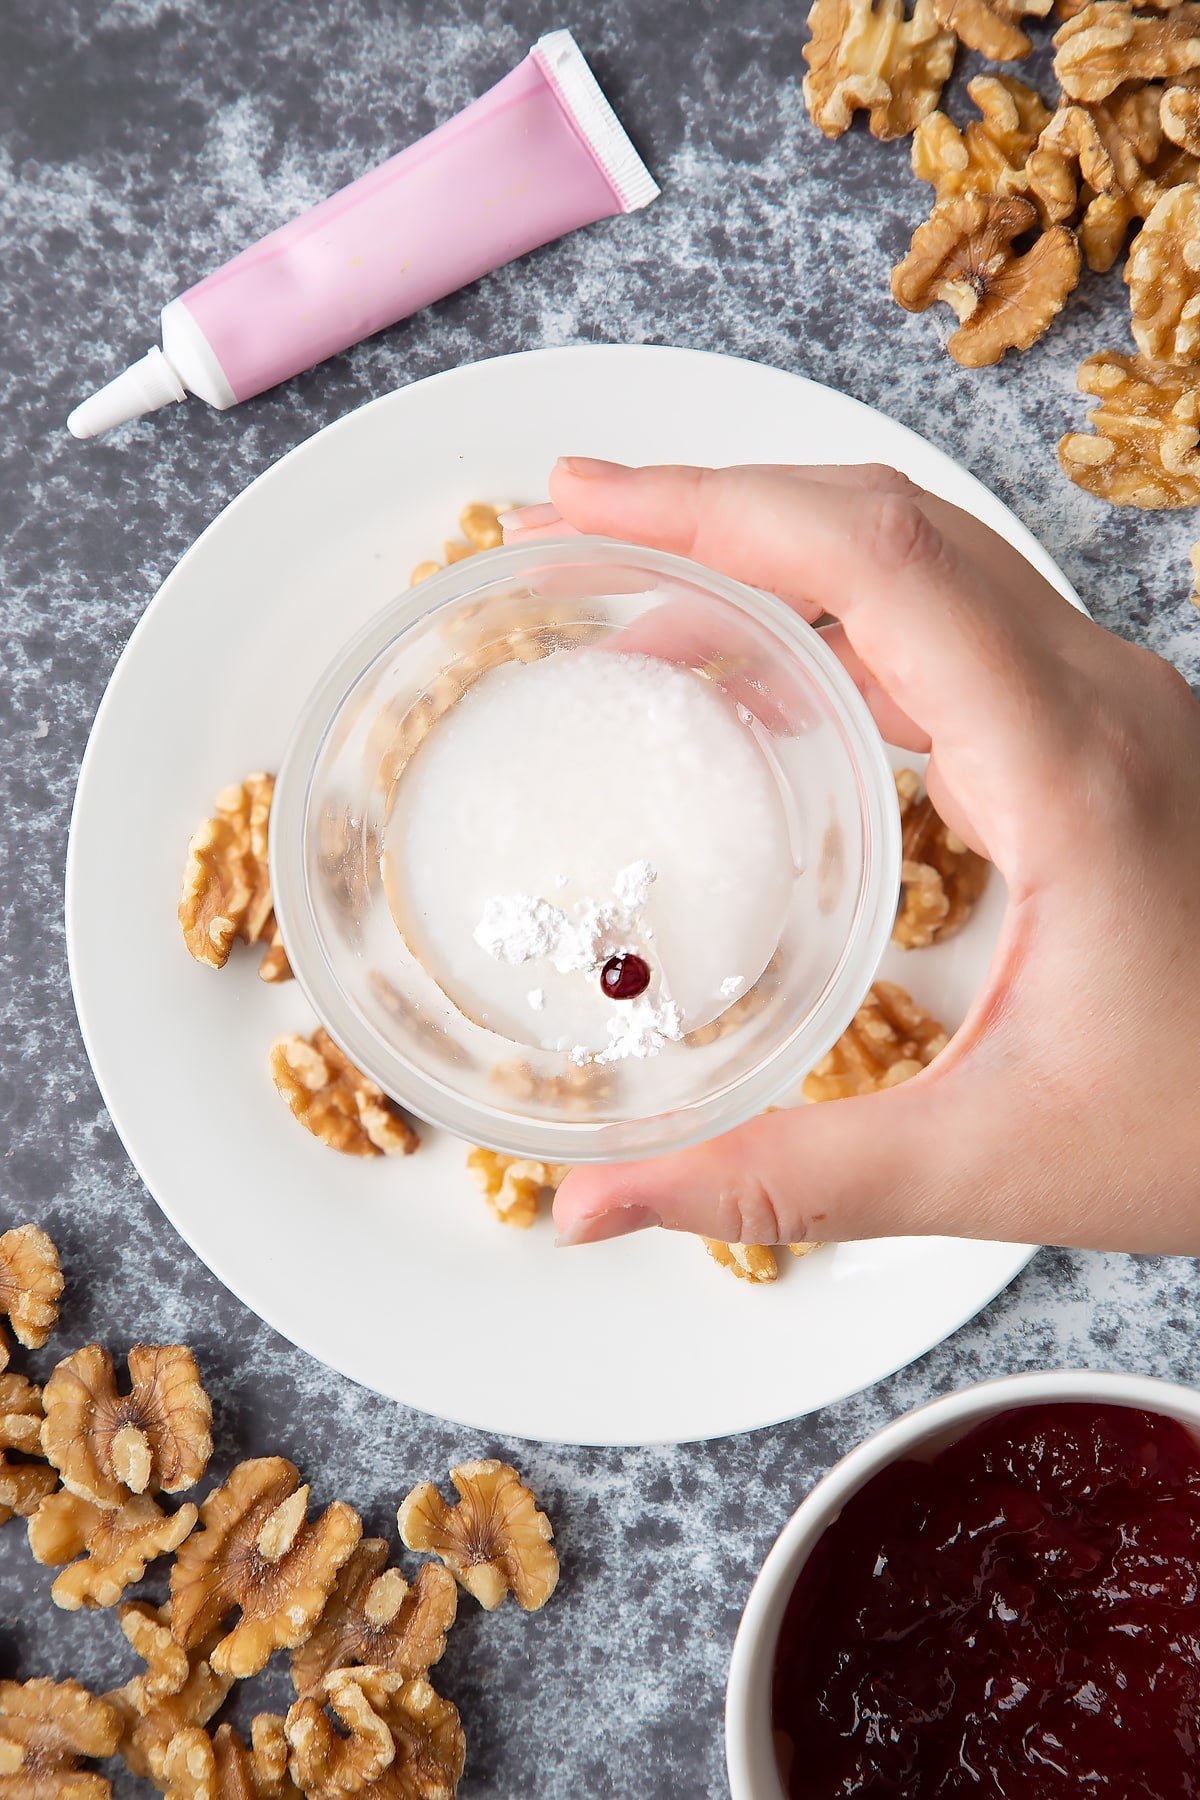 Walnuts on a white plate. Above, a hand holds a bowl containing icing sugar, water and pink food colouring. Ingredients to make gory Halloween cupcakes surround them.